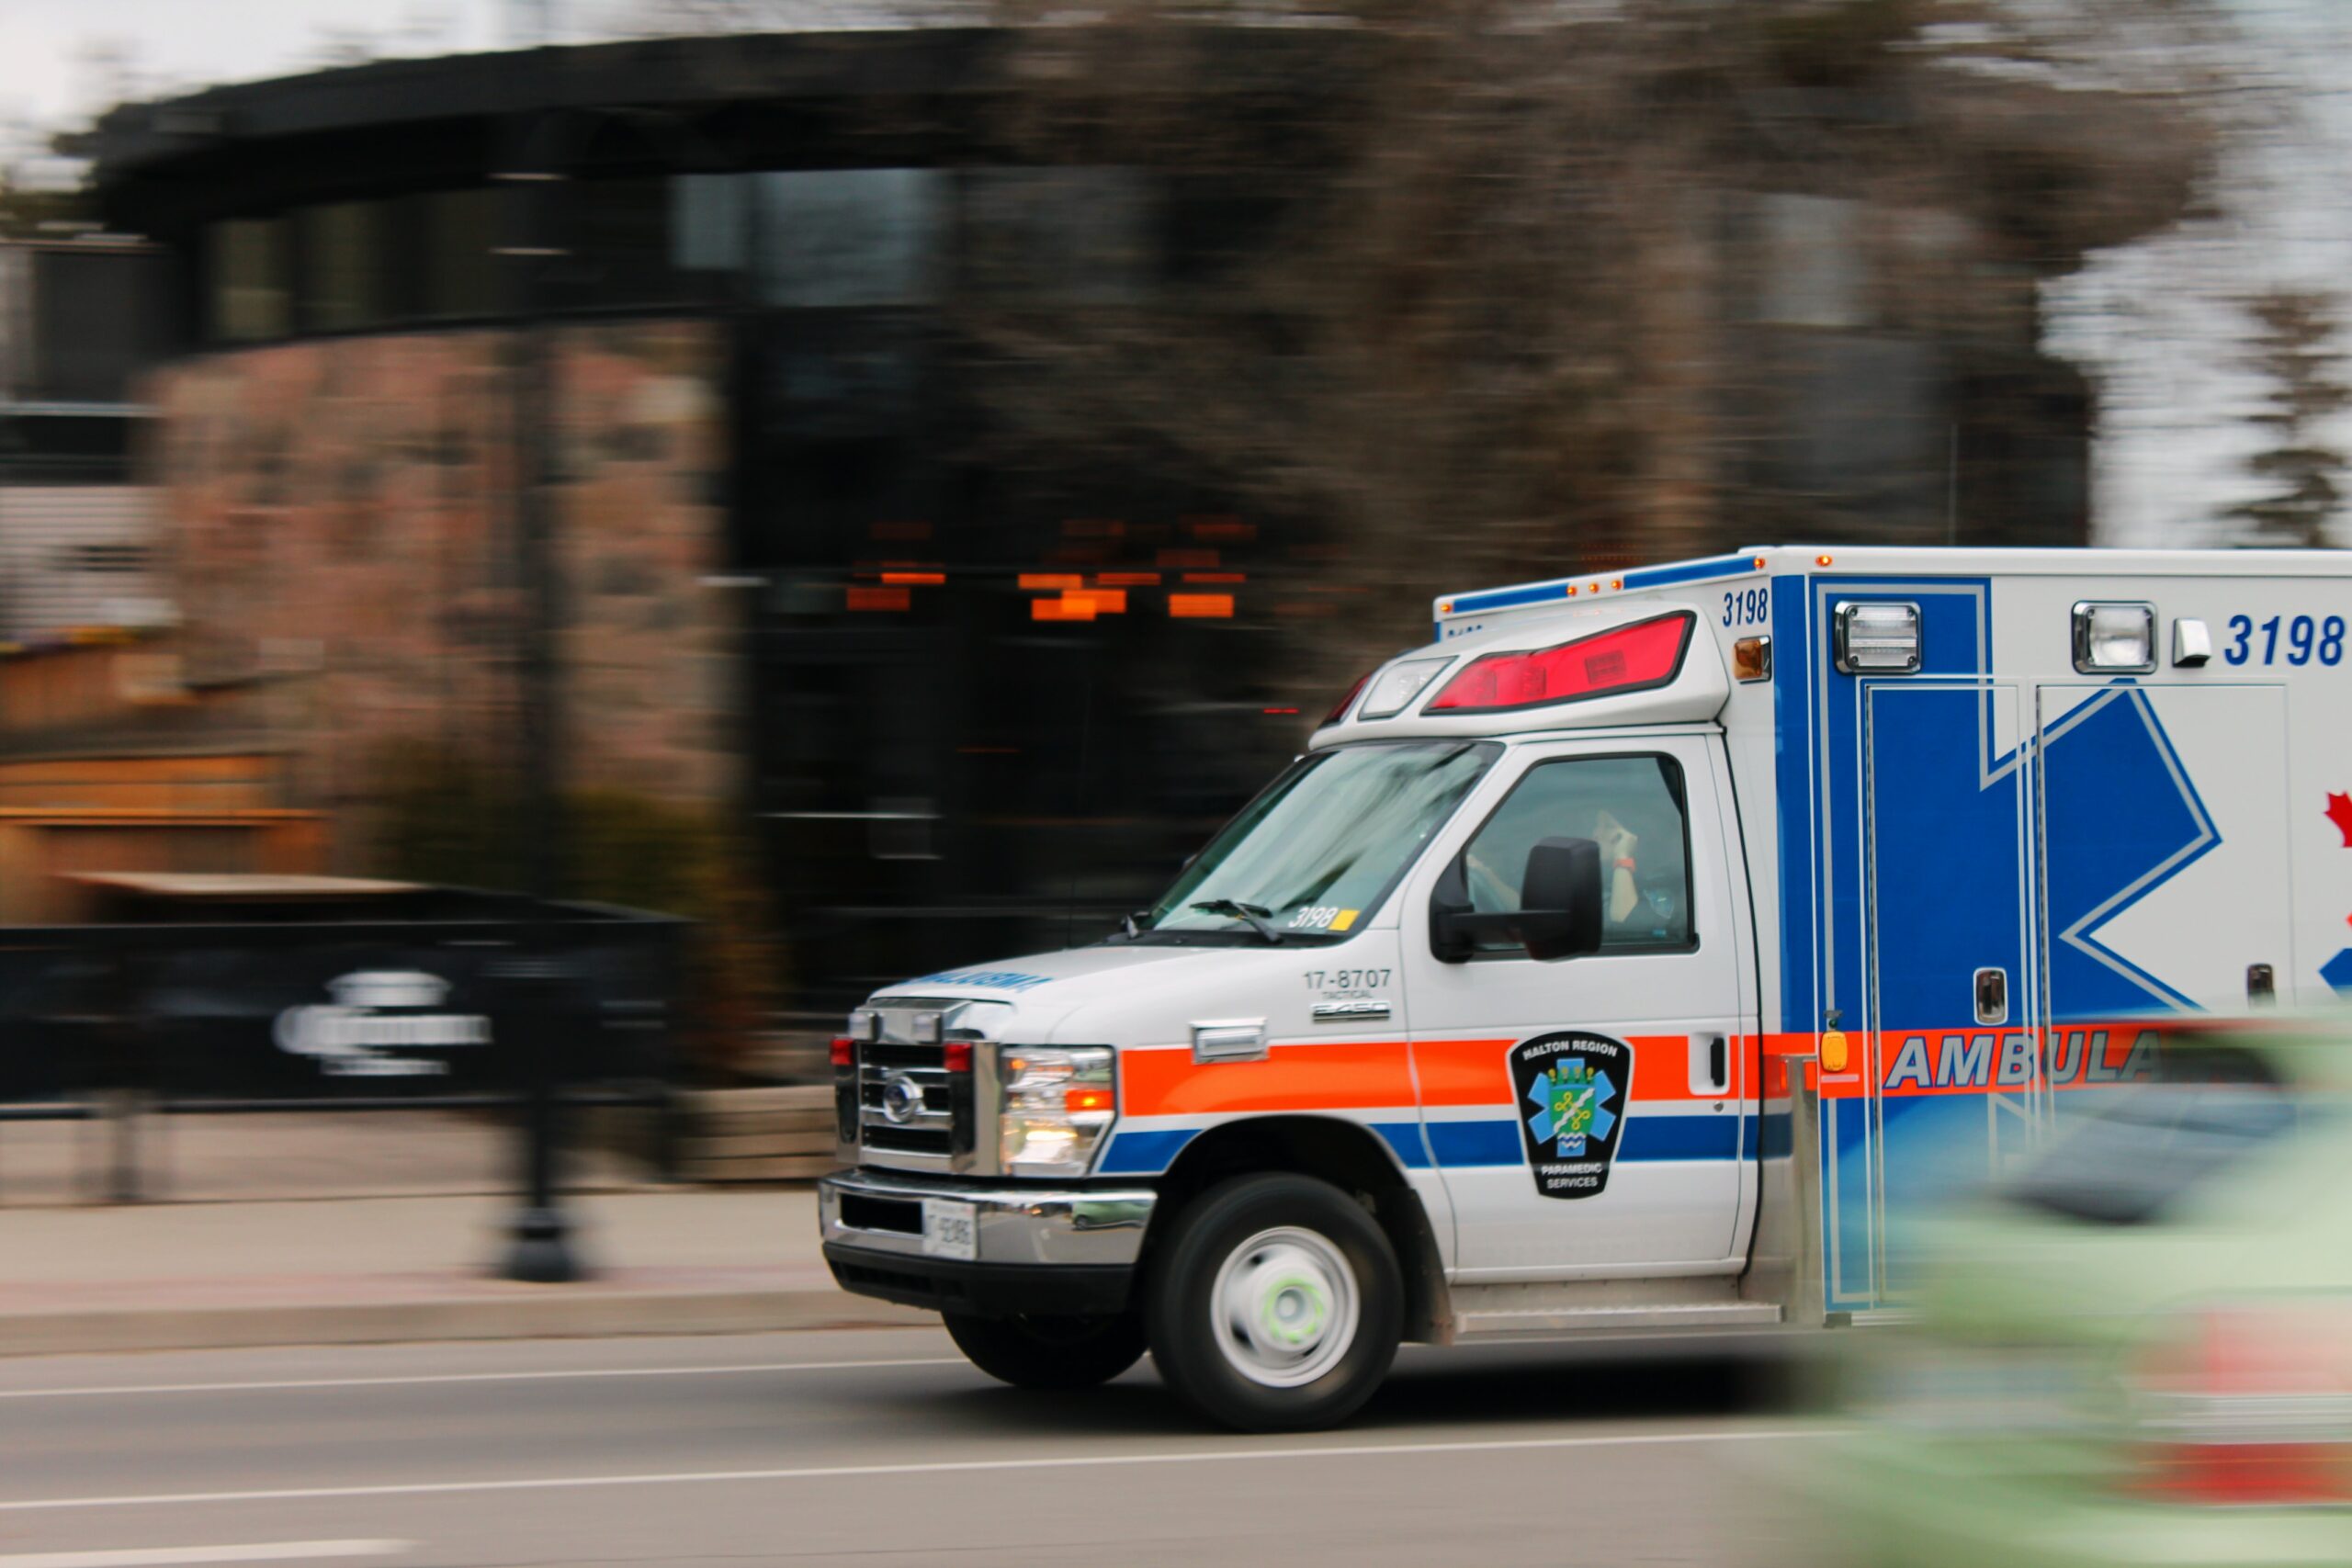 This is a photo of an ambulance, driving down the street with its emergency lights on.